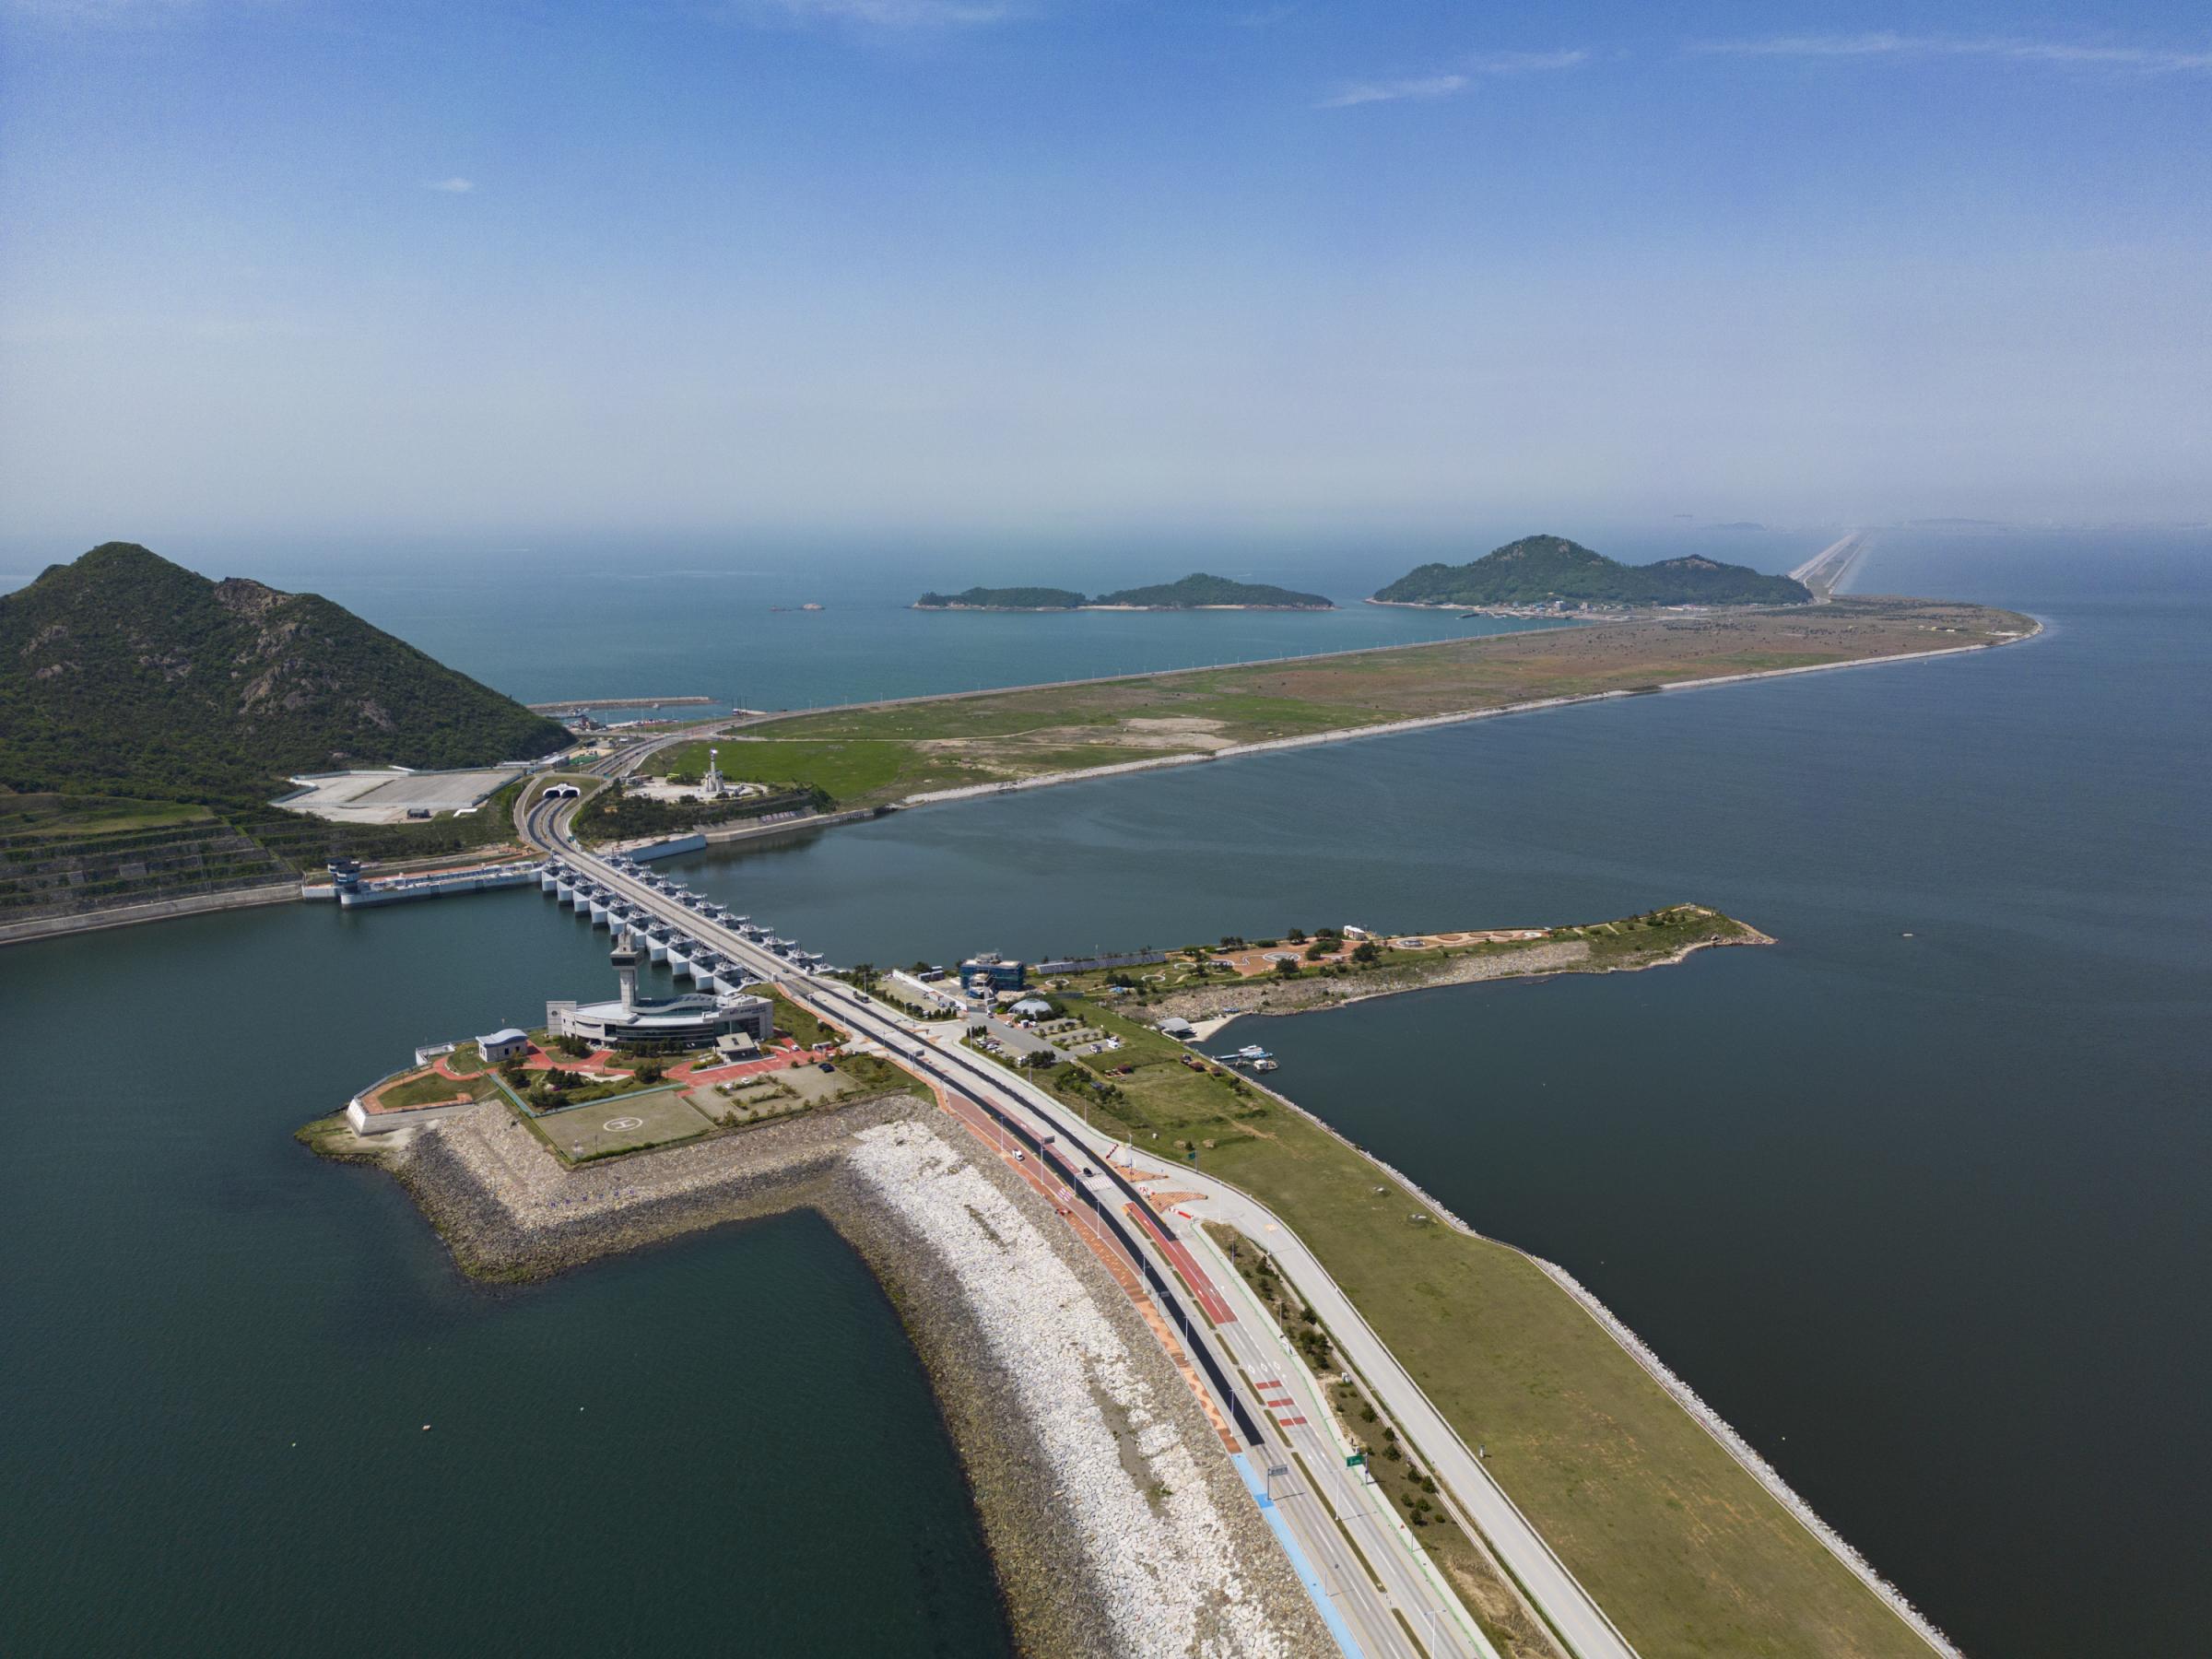 Saving South Korea's Tidal Flats - The 21-mile-long Saemangeum seawall is the longest in the...